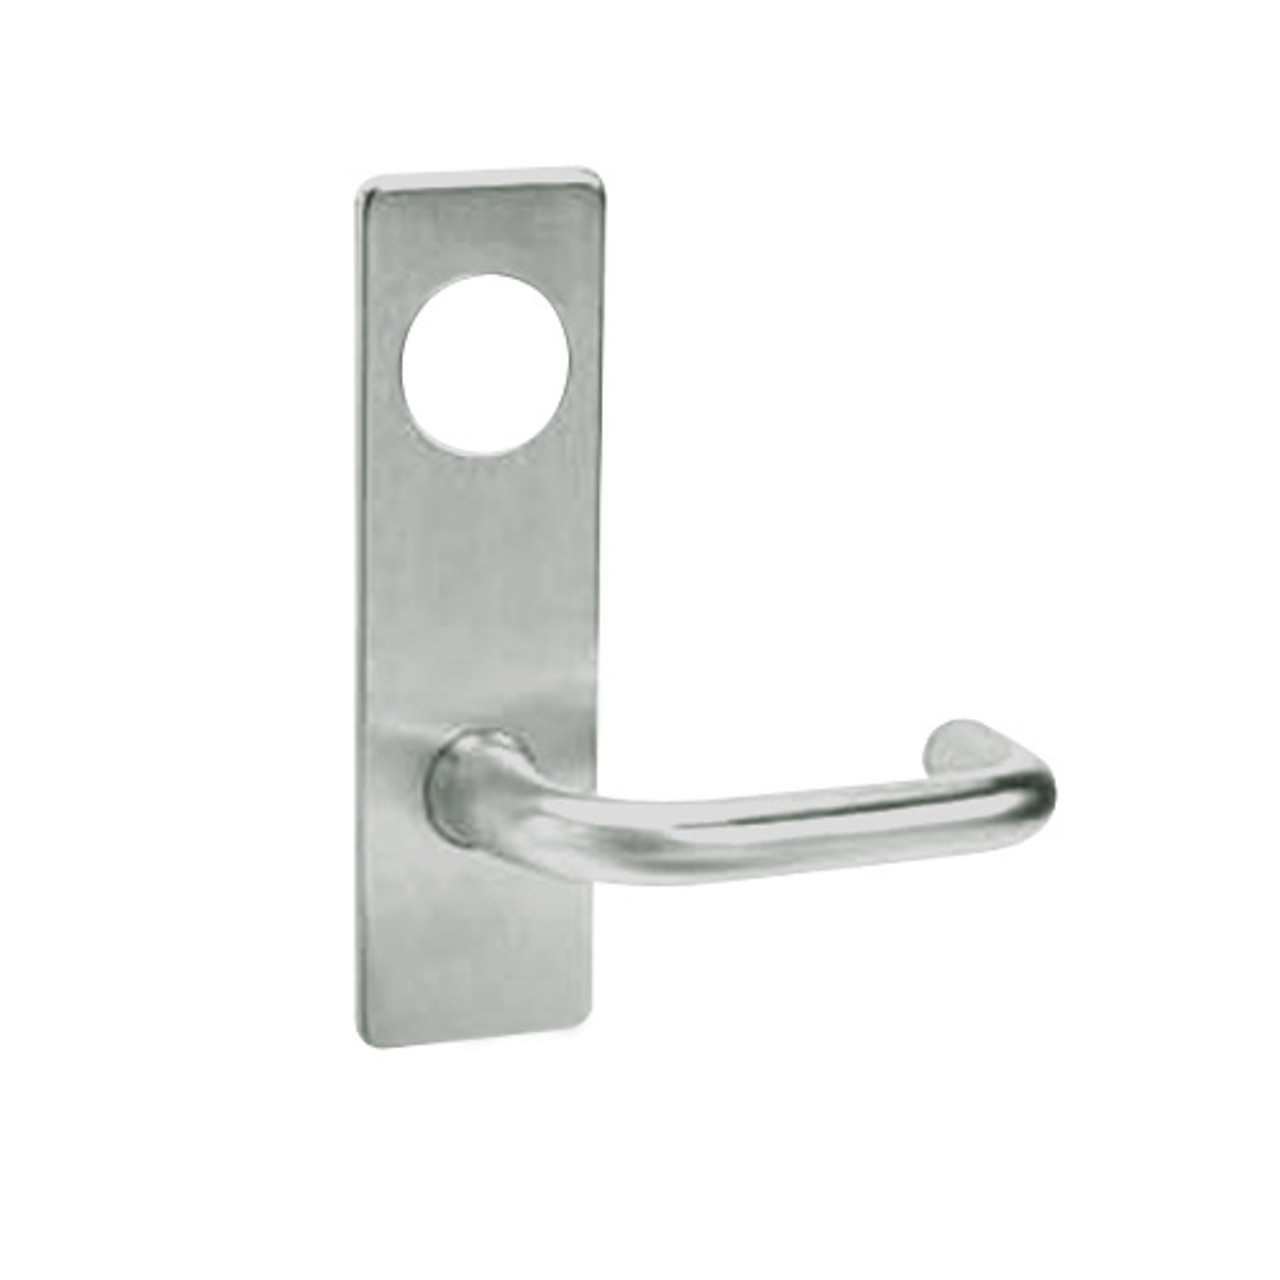 ML2048-LSR-619-M31 Corbin Russwin ML2000 Series Mortise Entrance Trim Pack with Lustra Lever in Satin Nickel